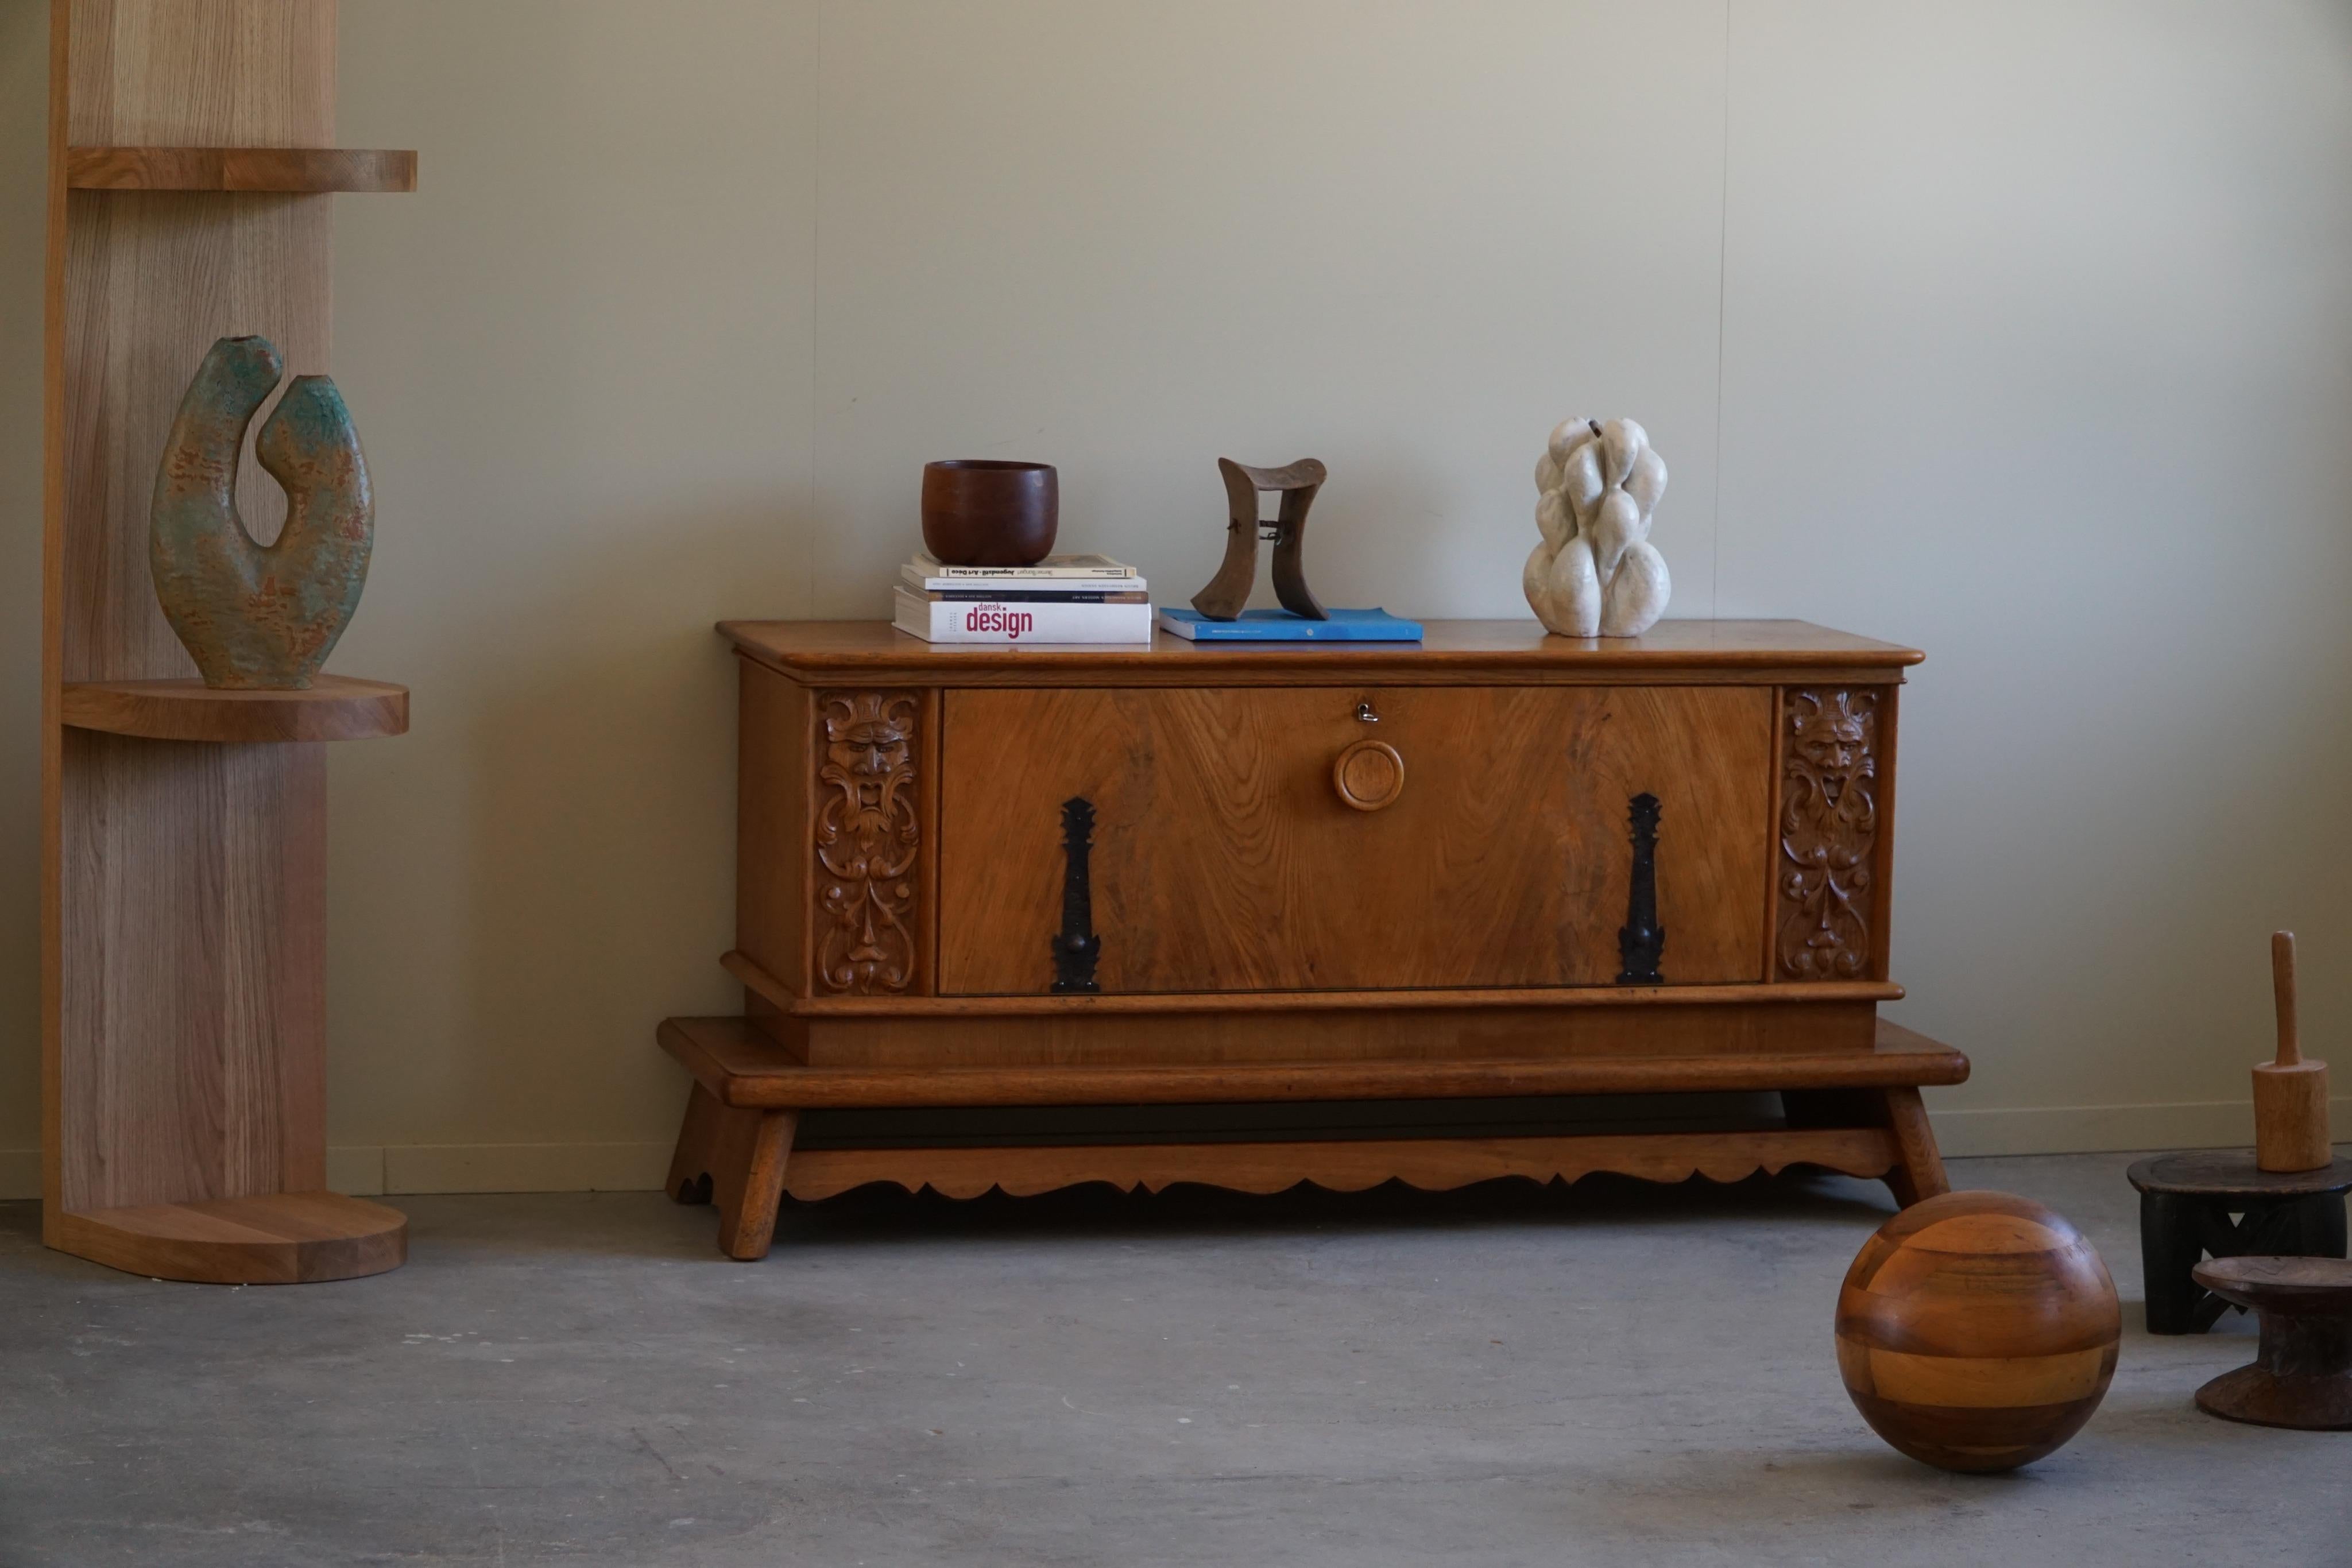 Danish Art Deco sideboard in solid oak, made in the early 20th century. With its chunky legs and a sculptural front, this sideboard can easily be paired with a modern interior. Such as other Danish designers, like Wegner or a Swan from Arne